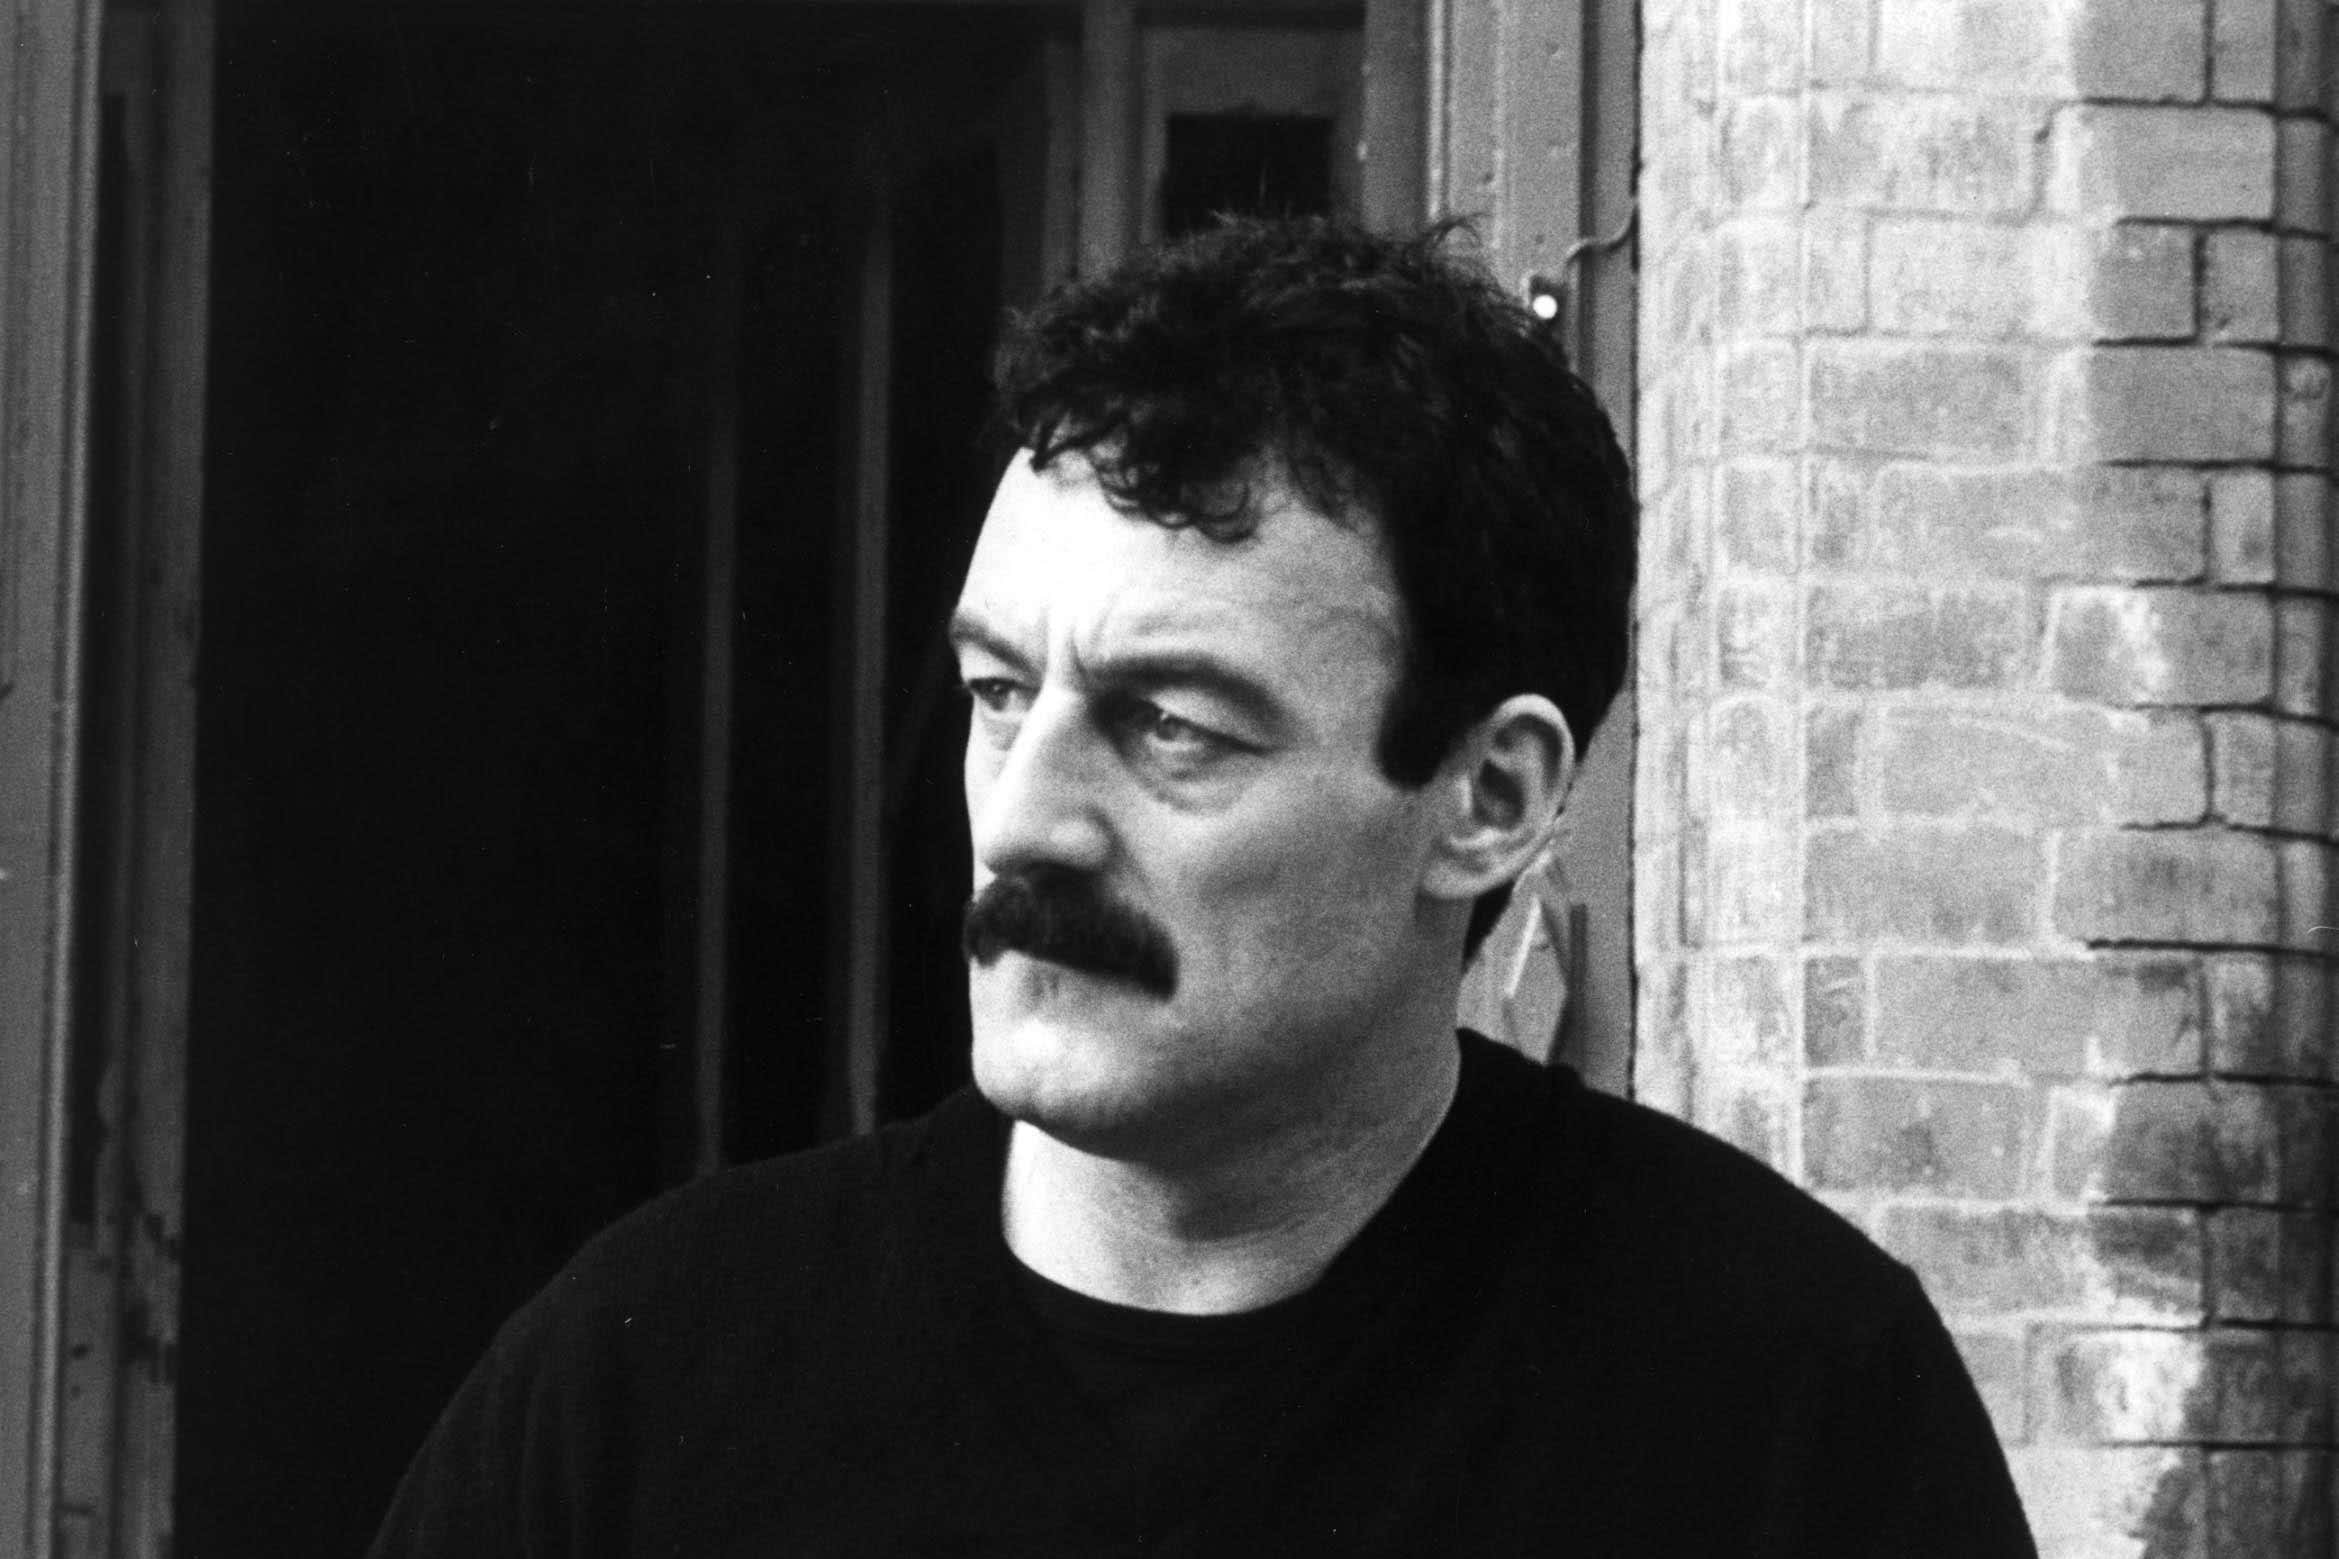 Hill as Yosser Hughes in ‘Boys from the Blackstuff’